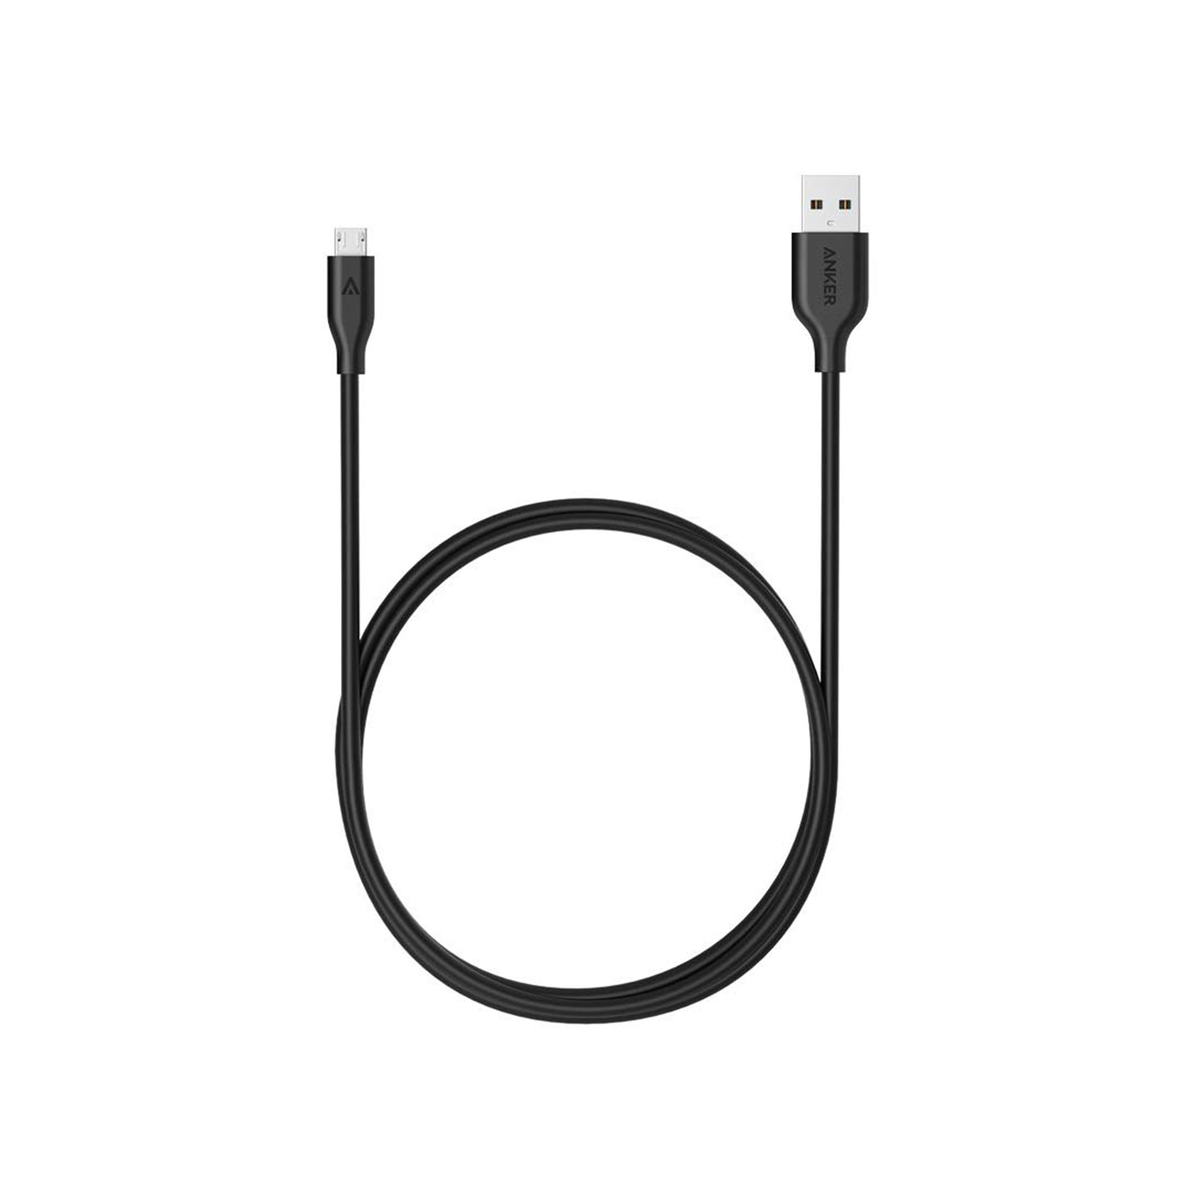 Anker 3feet Powerline Micro Usb Cable A8132H12 Black